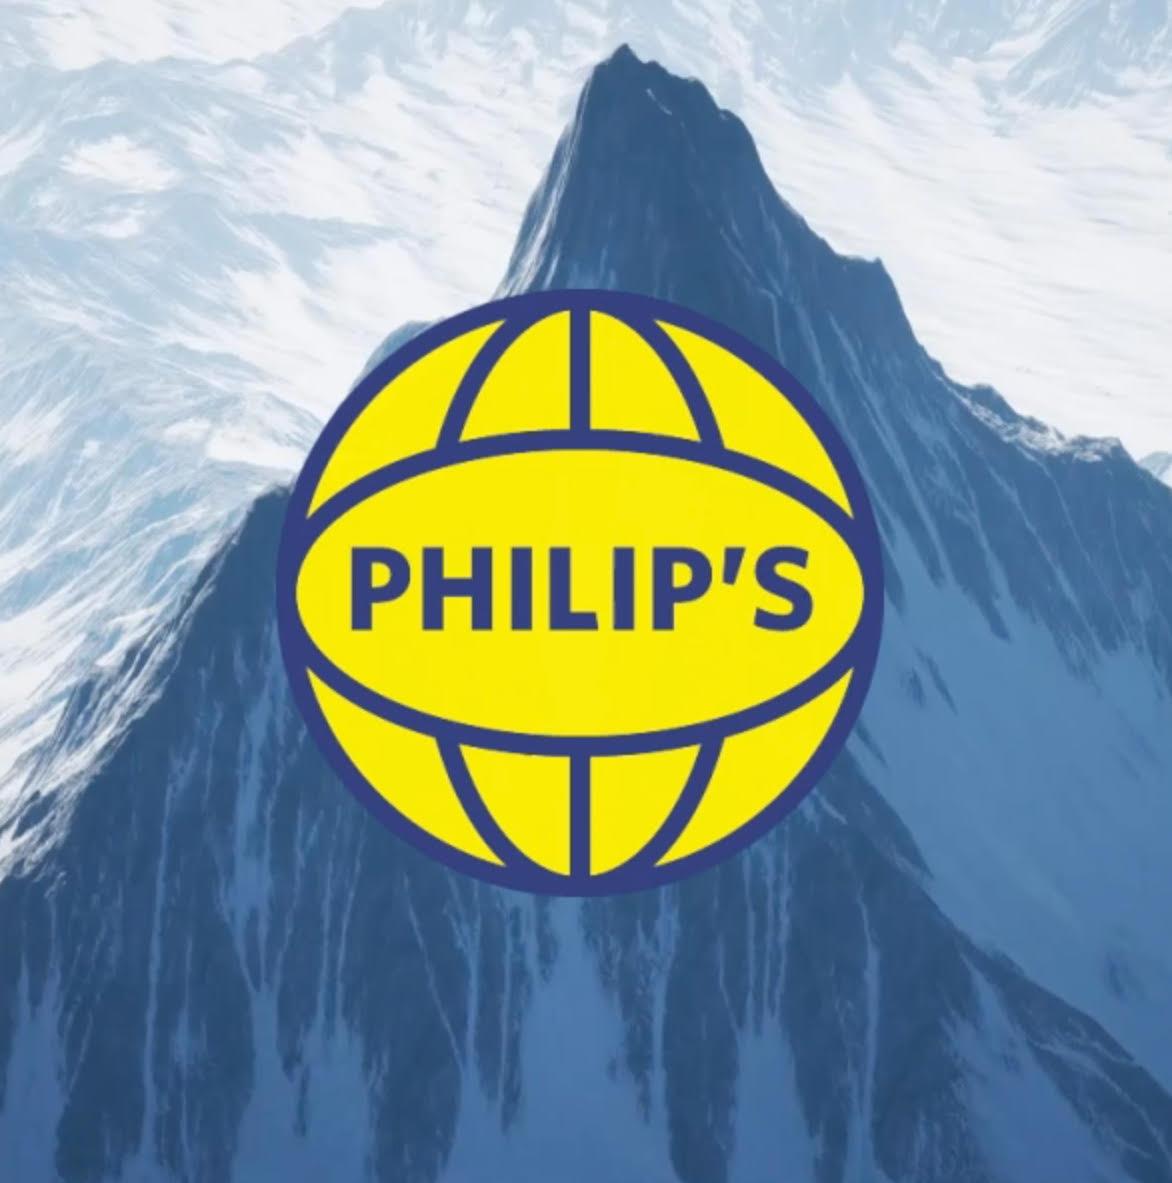 Philp's is going places: UK Number 1 Road atlas brand relaunch February  2021